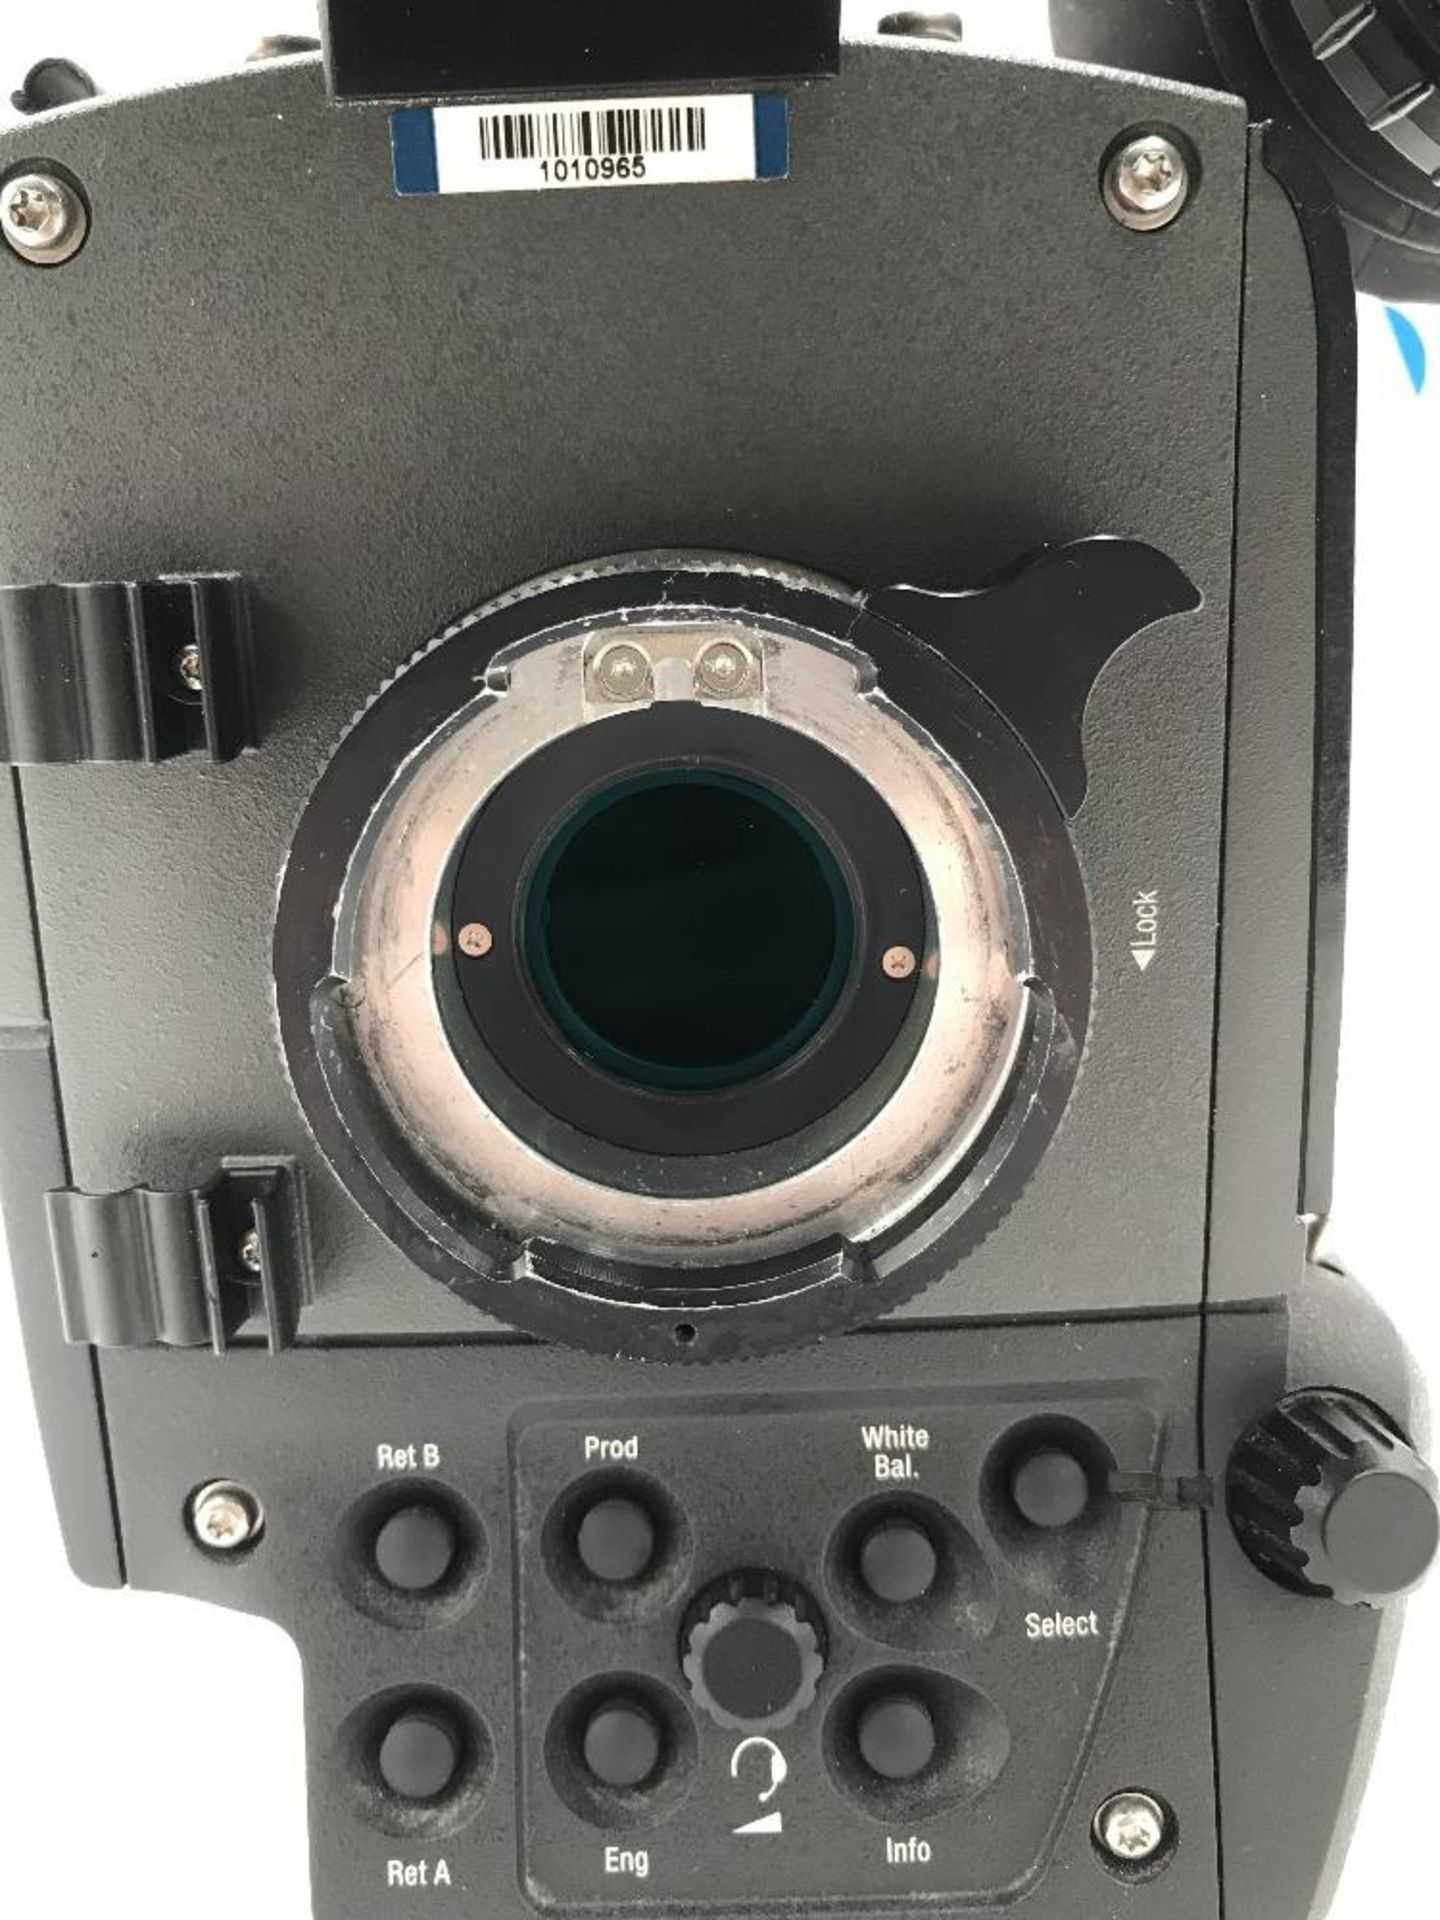 Grass Valley LDX 86N Universe 4K Camera with 7.4'' OLED Viewfinder & Camera Control Unit - Image 6 of 17